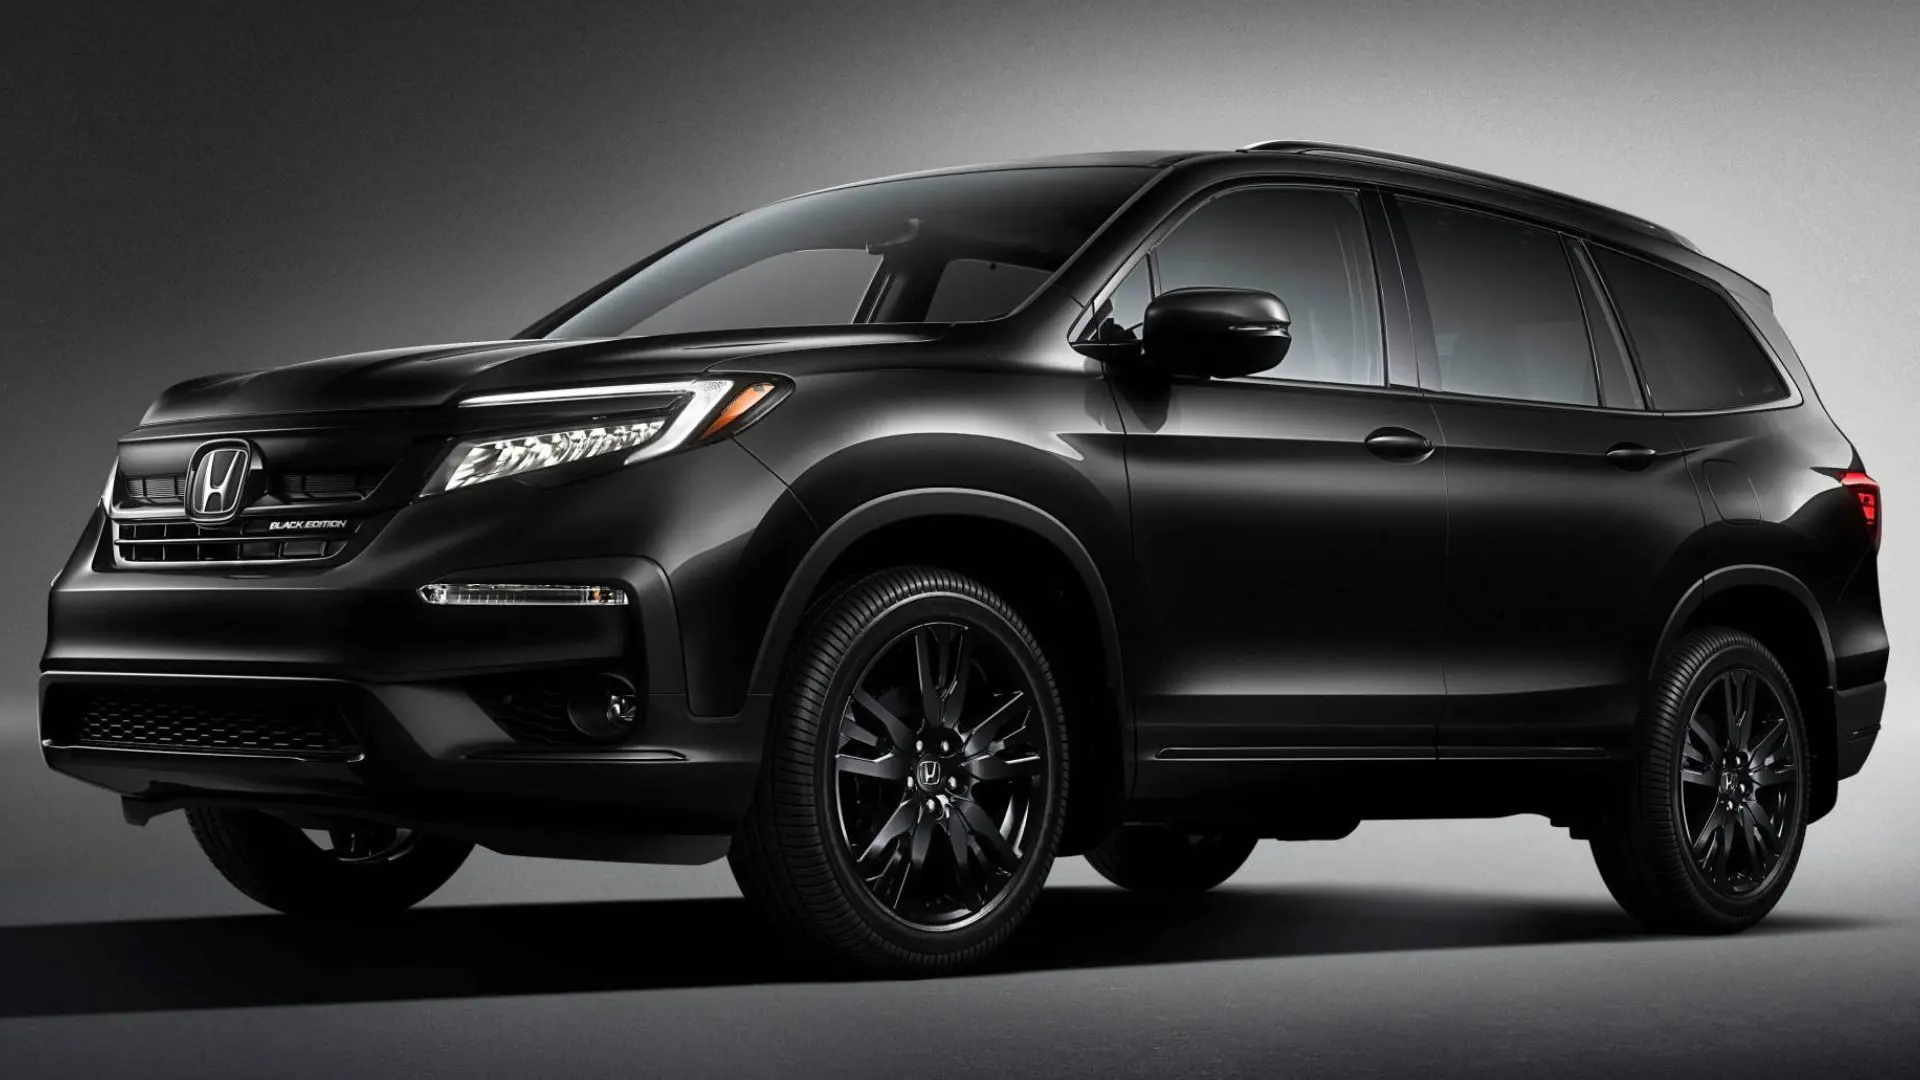 A black honda suv is parked in the dark.